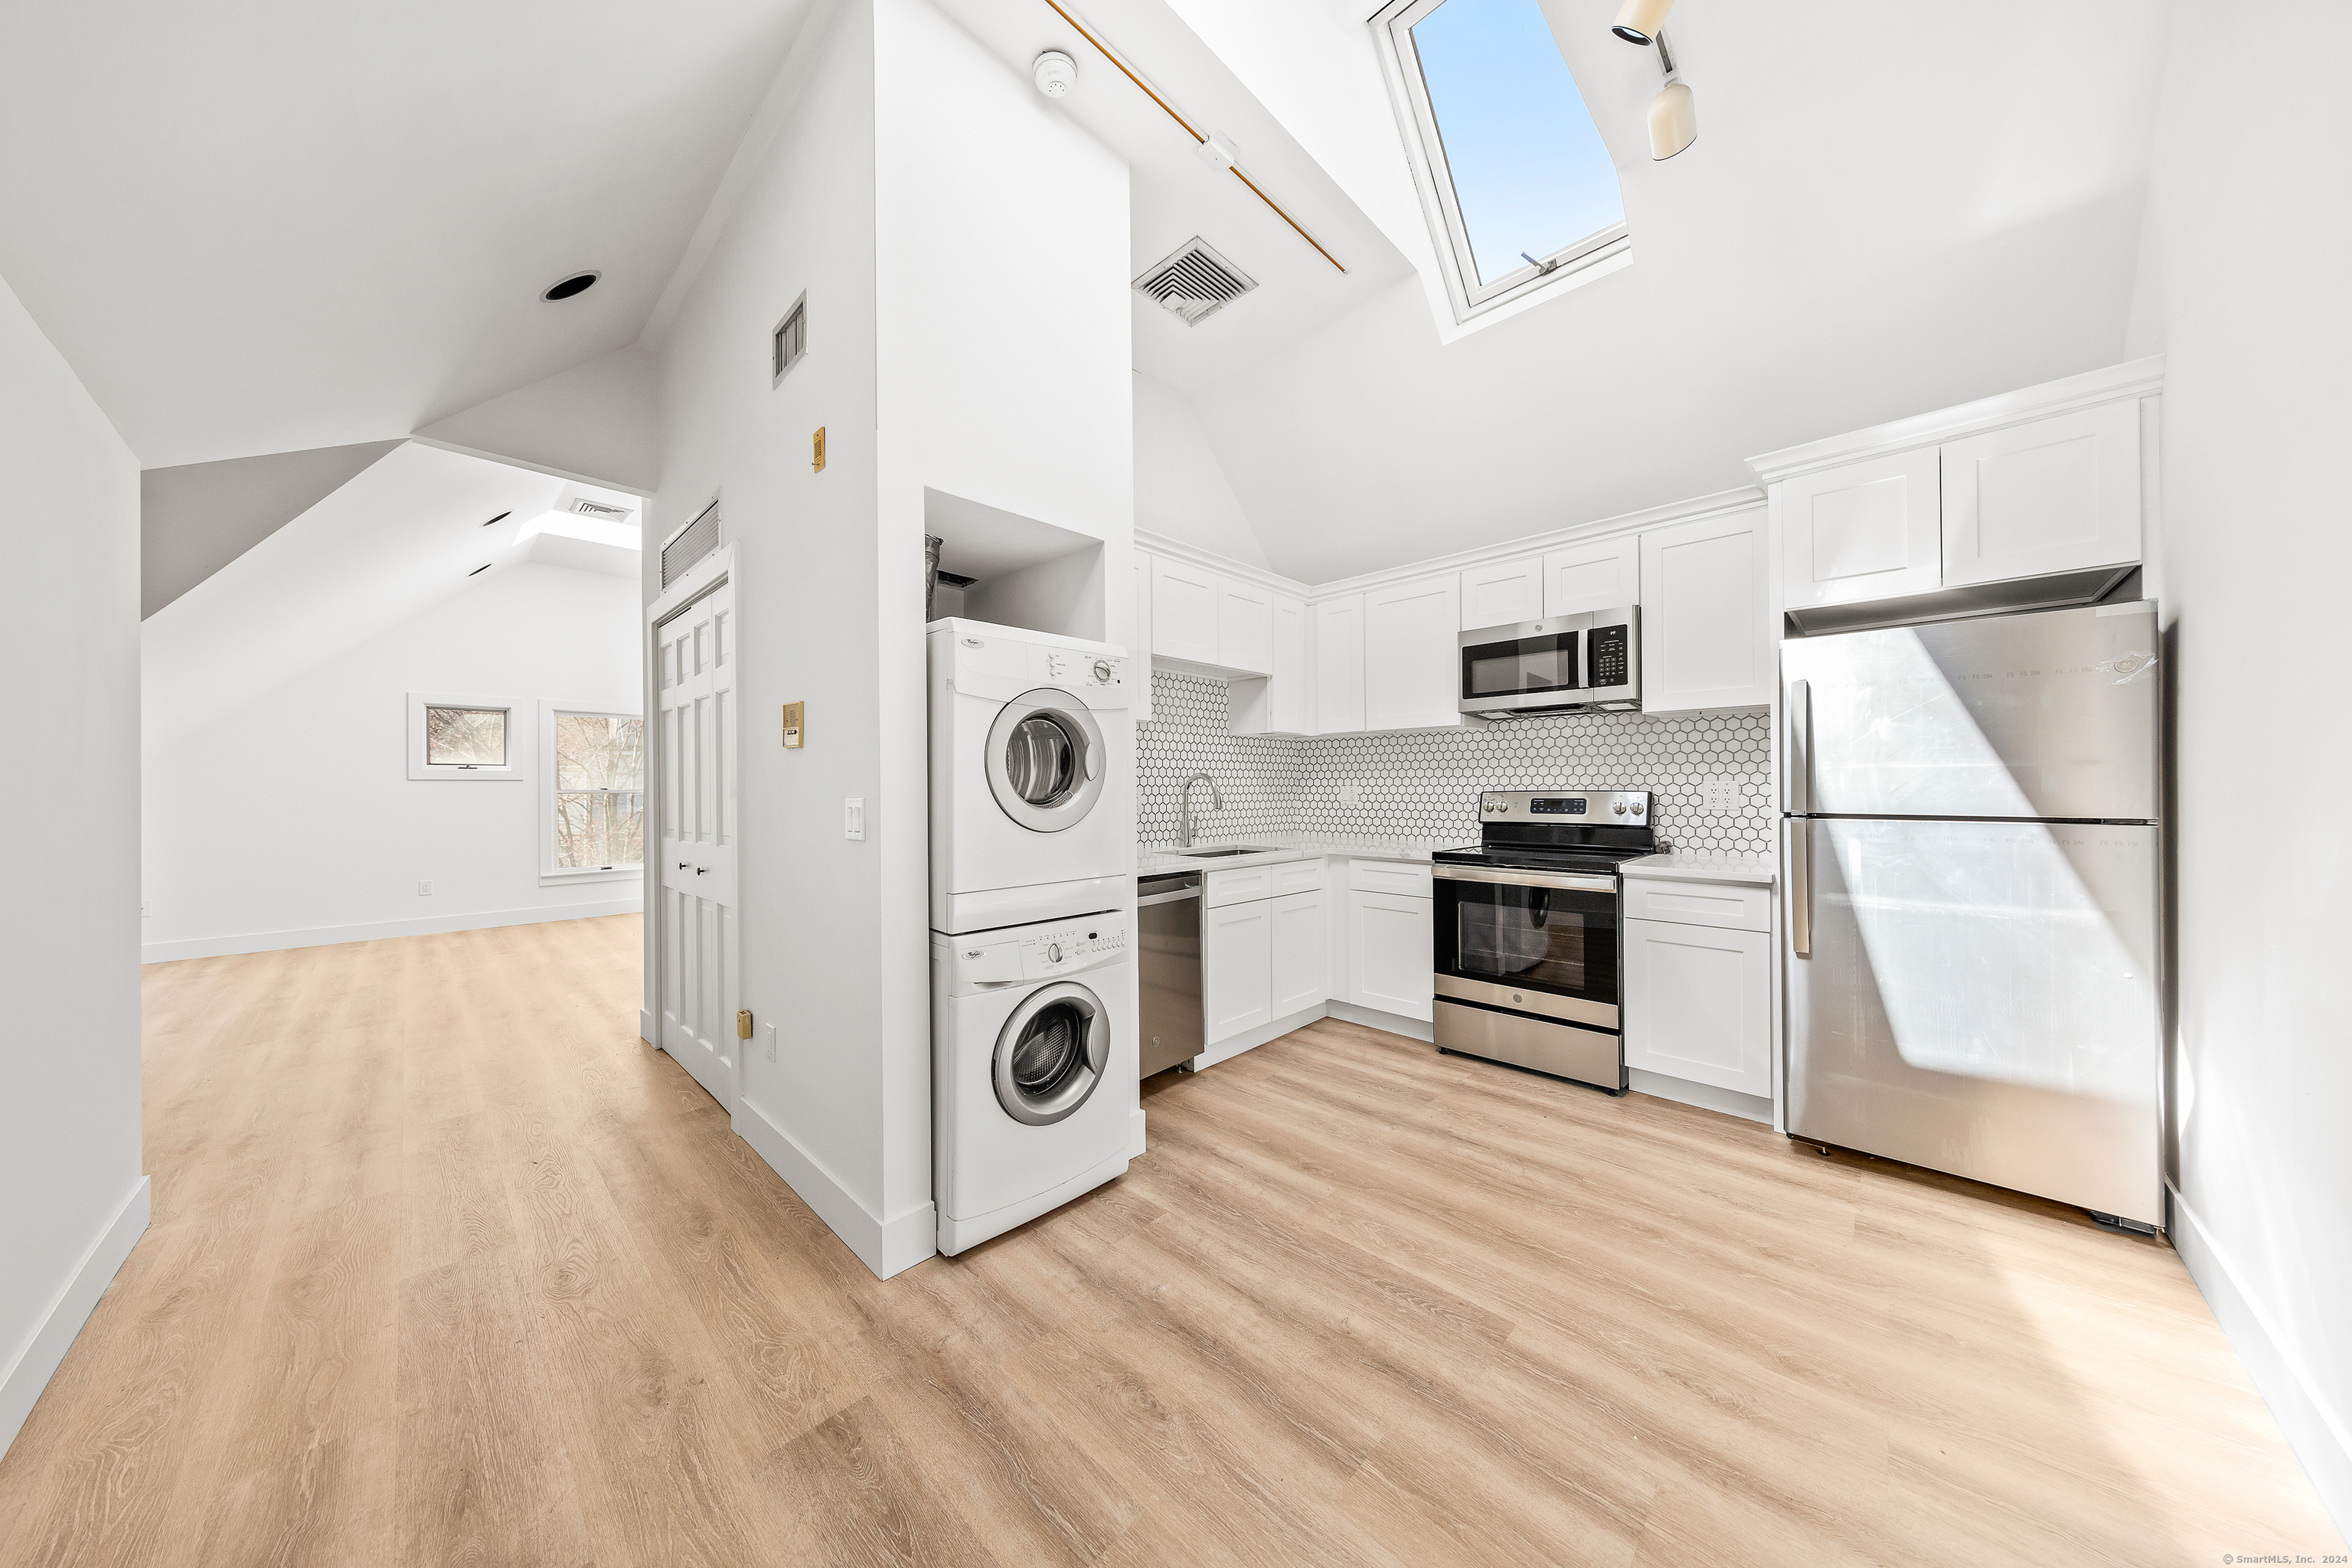 a kitchen with stainless steel appliances a stove a refrigerator and cabinets